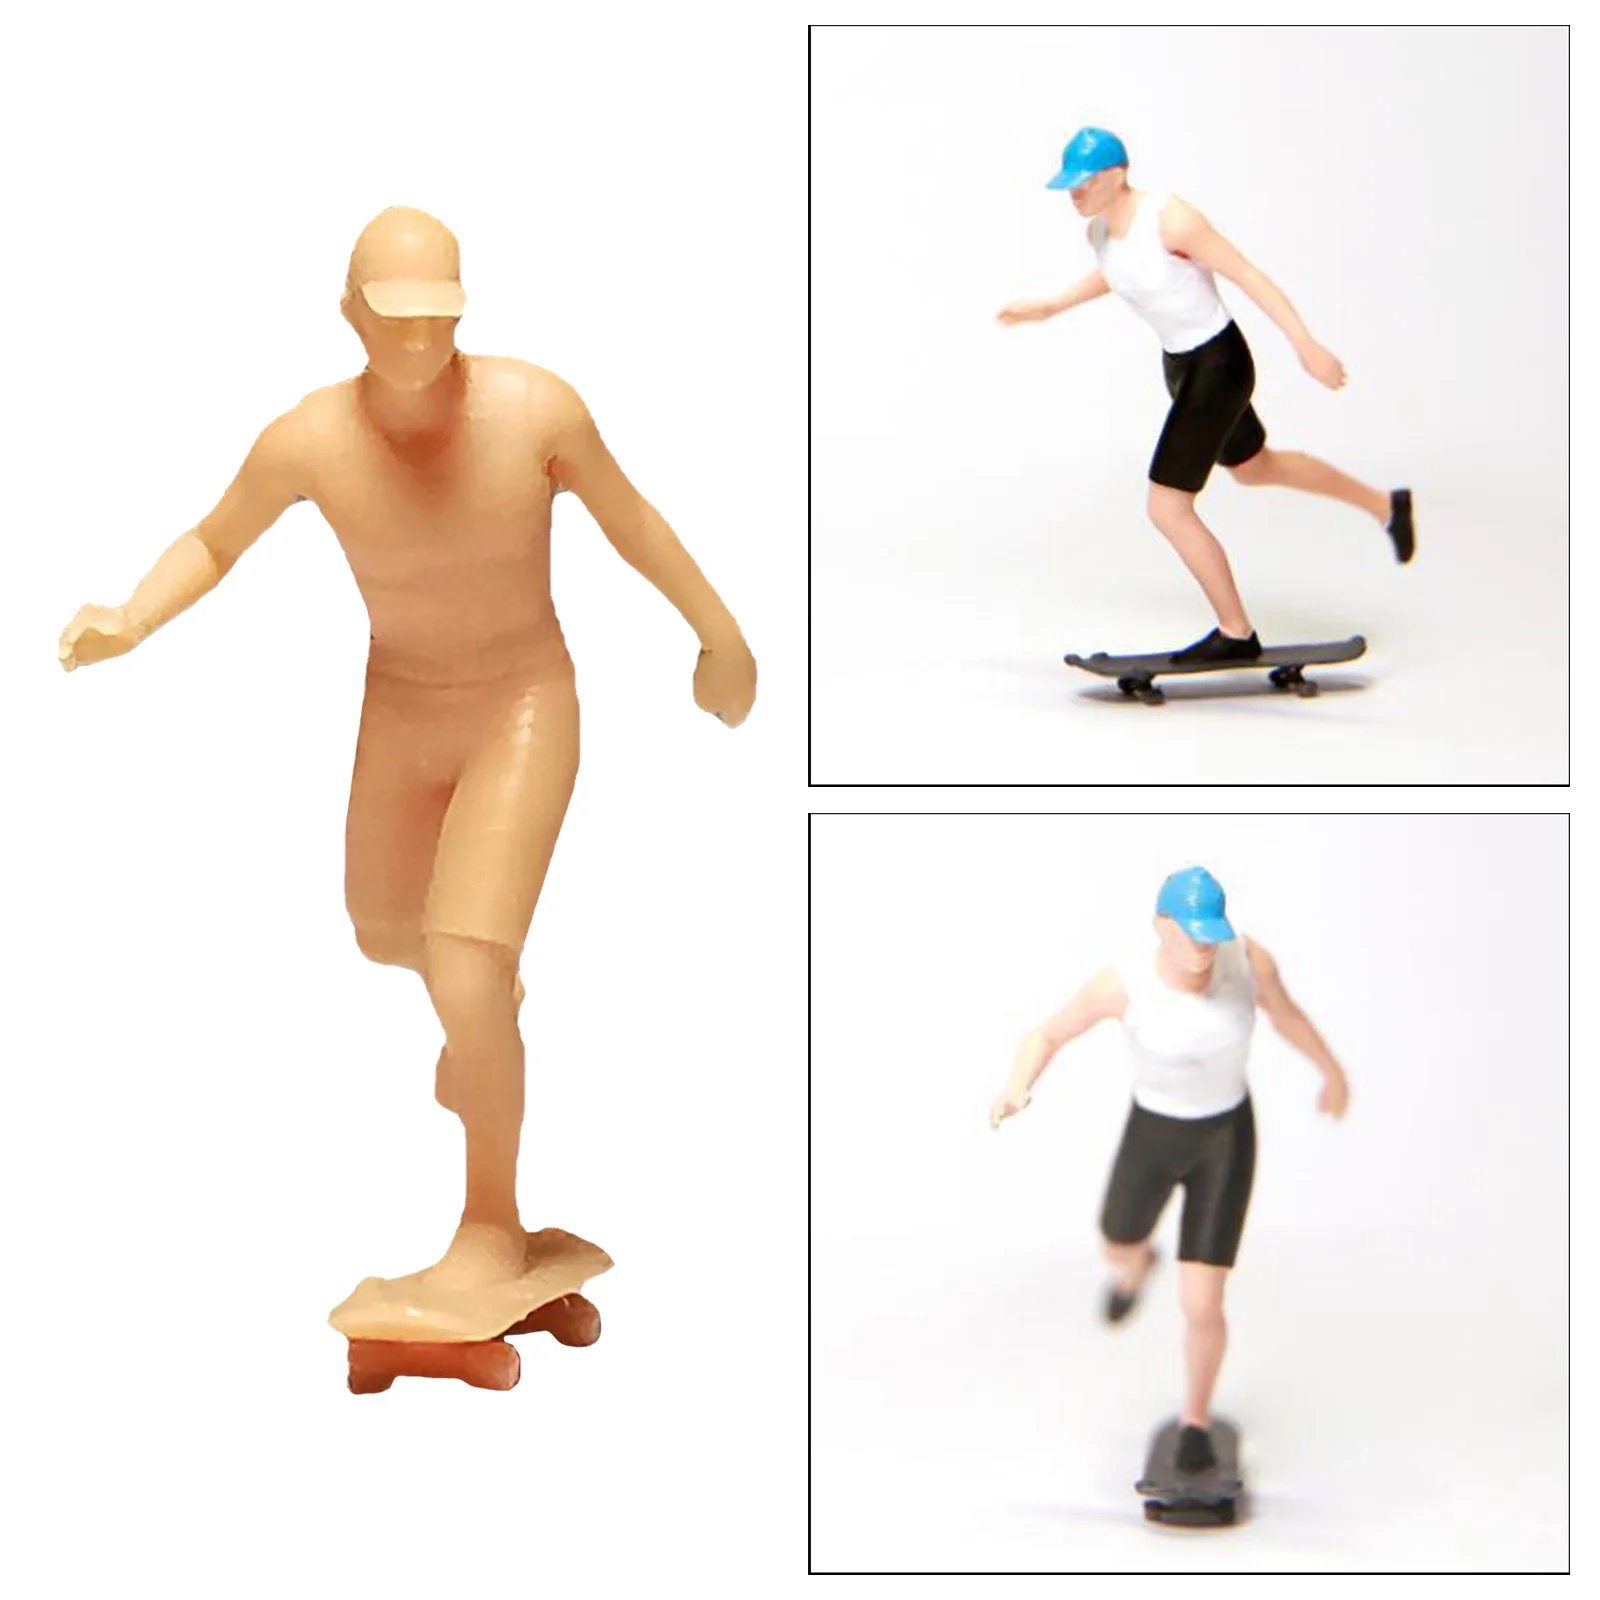 1:64 Unpainted Skater Boy Model Tiny People Street Sand Table Children Toy